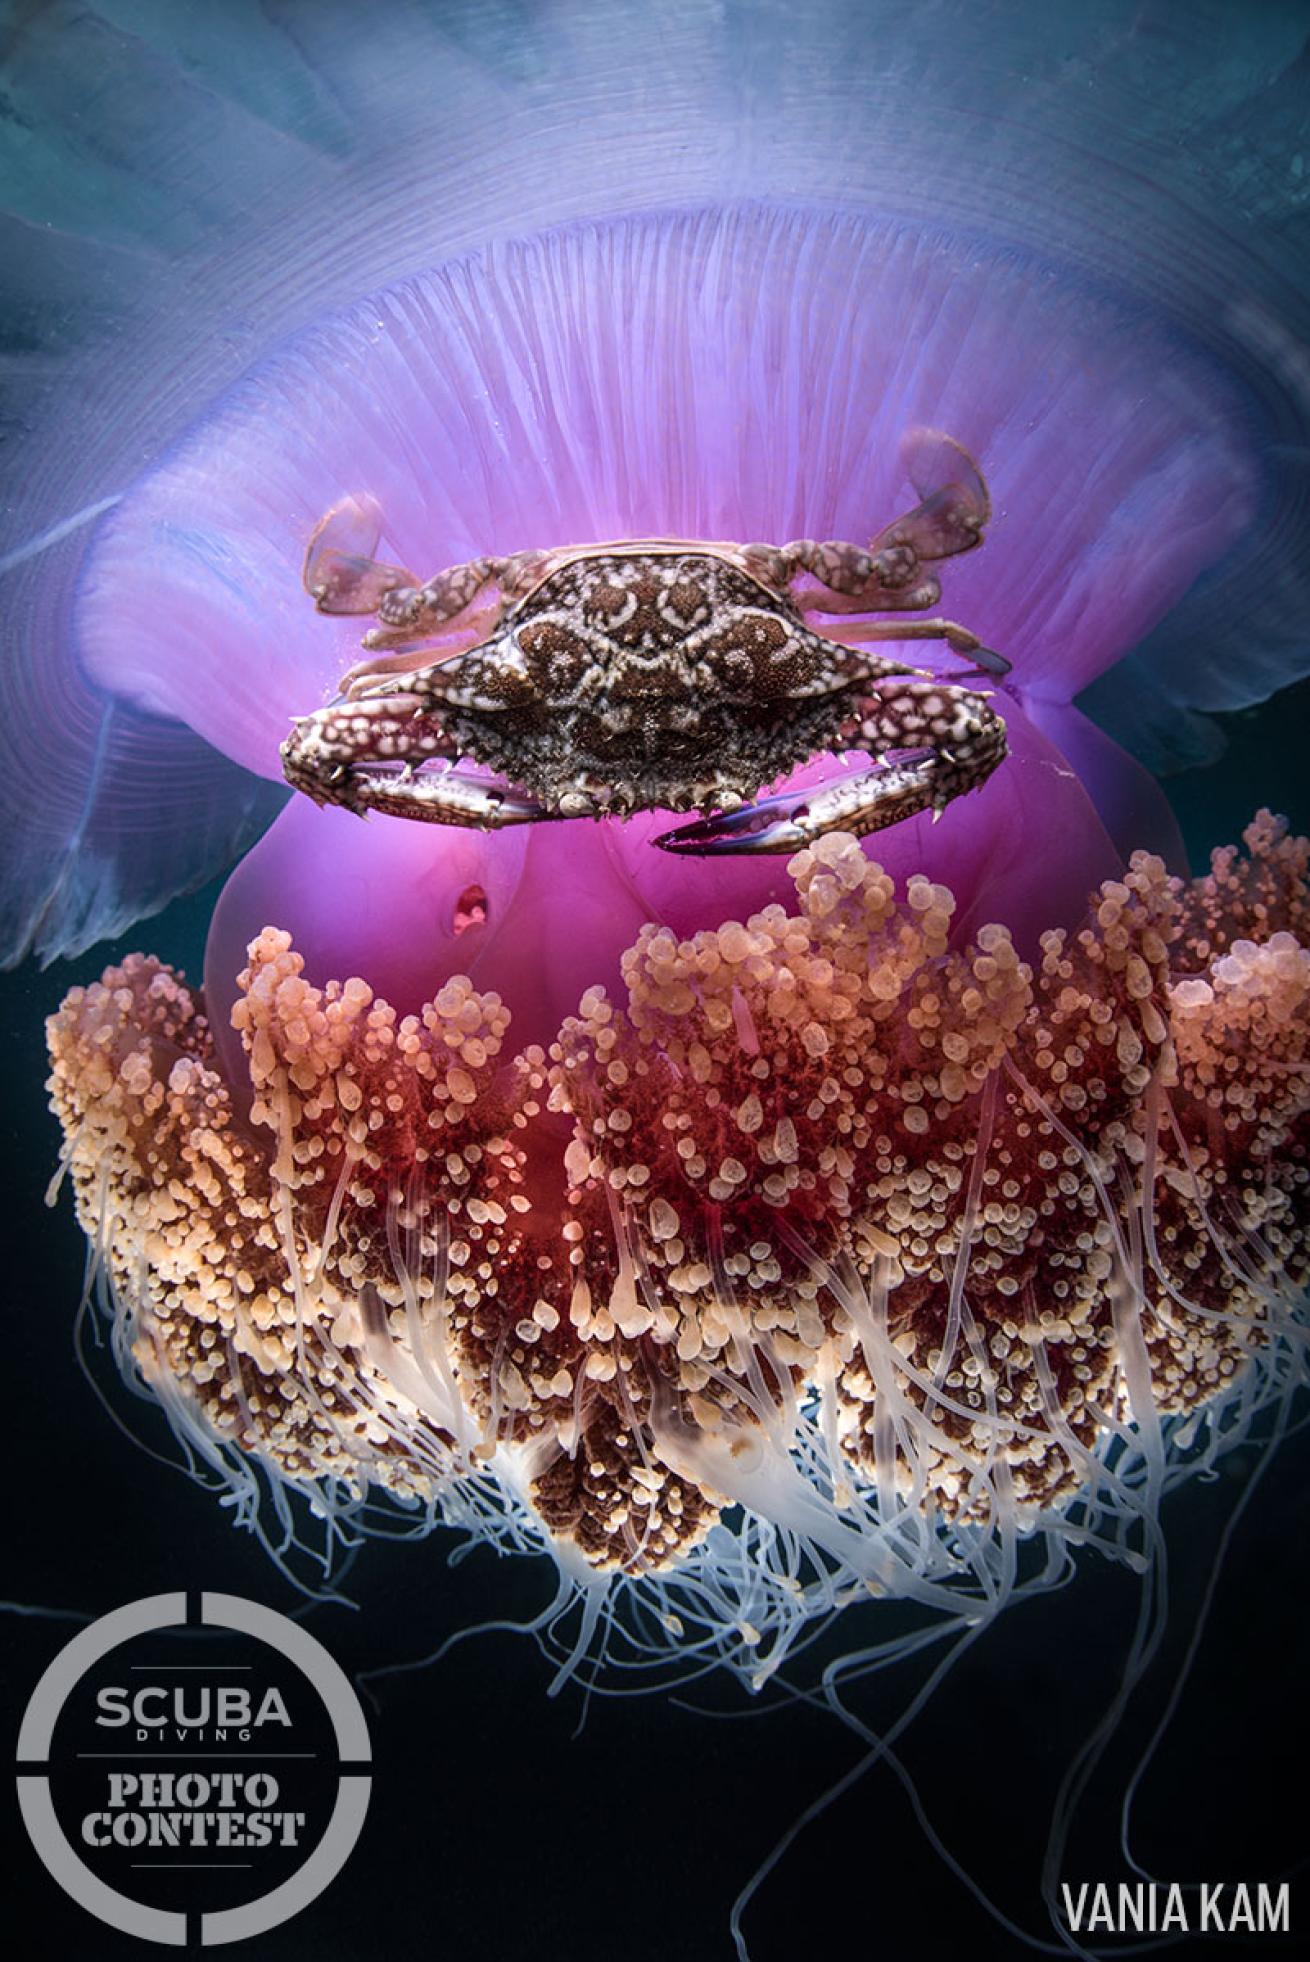 Crab riding on a jellyfish underwater photo